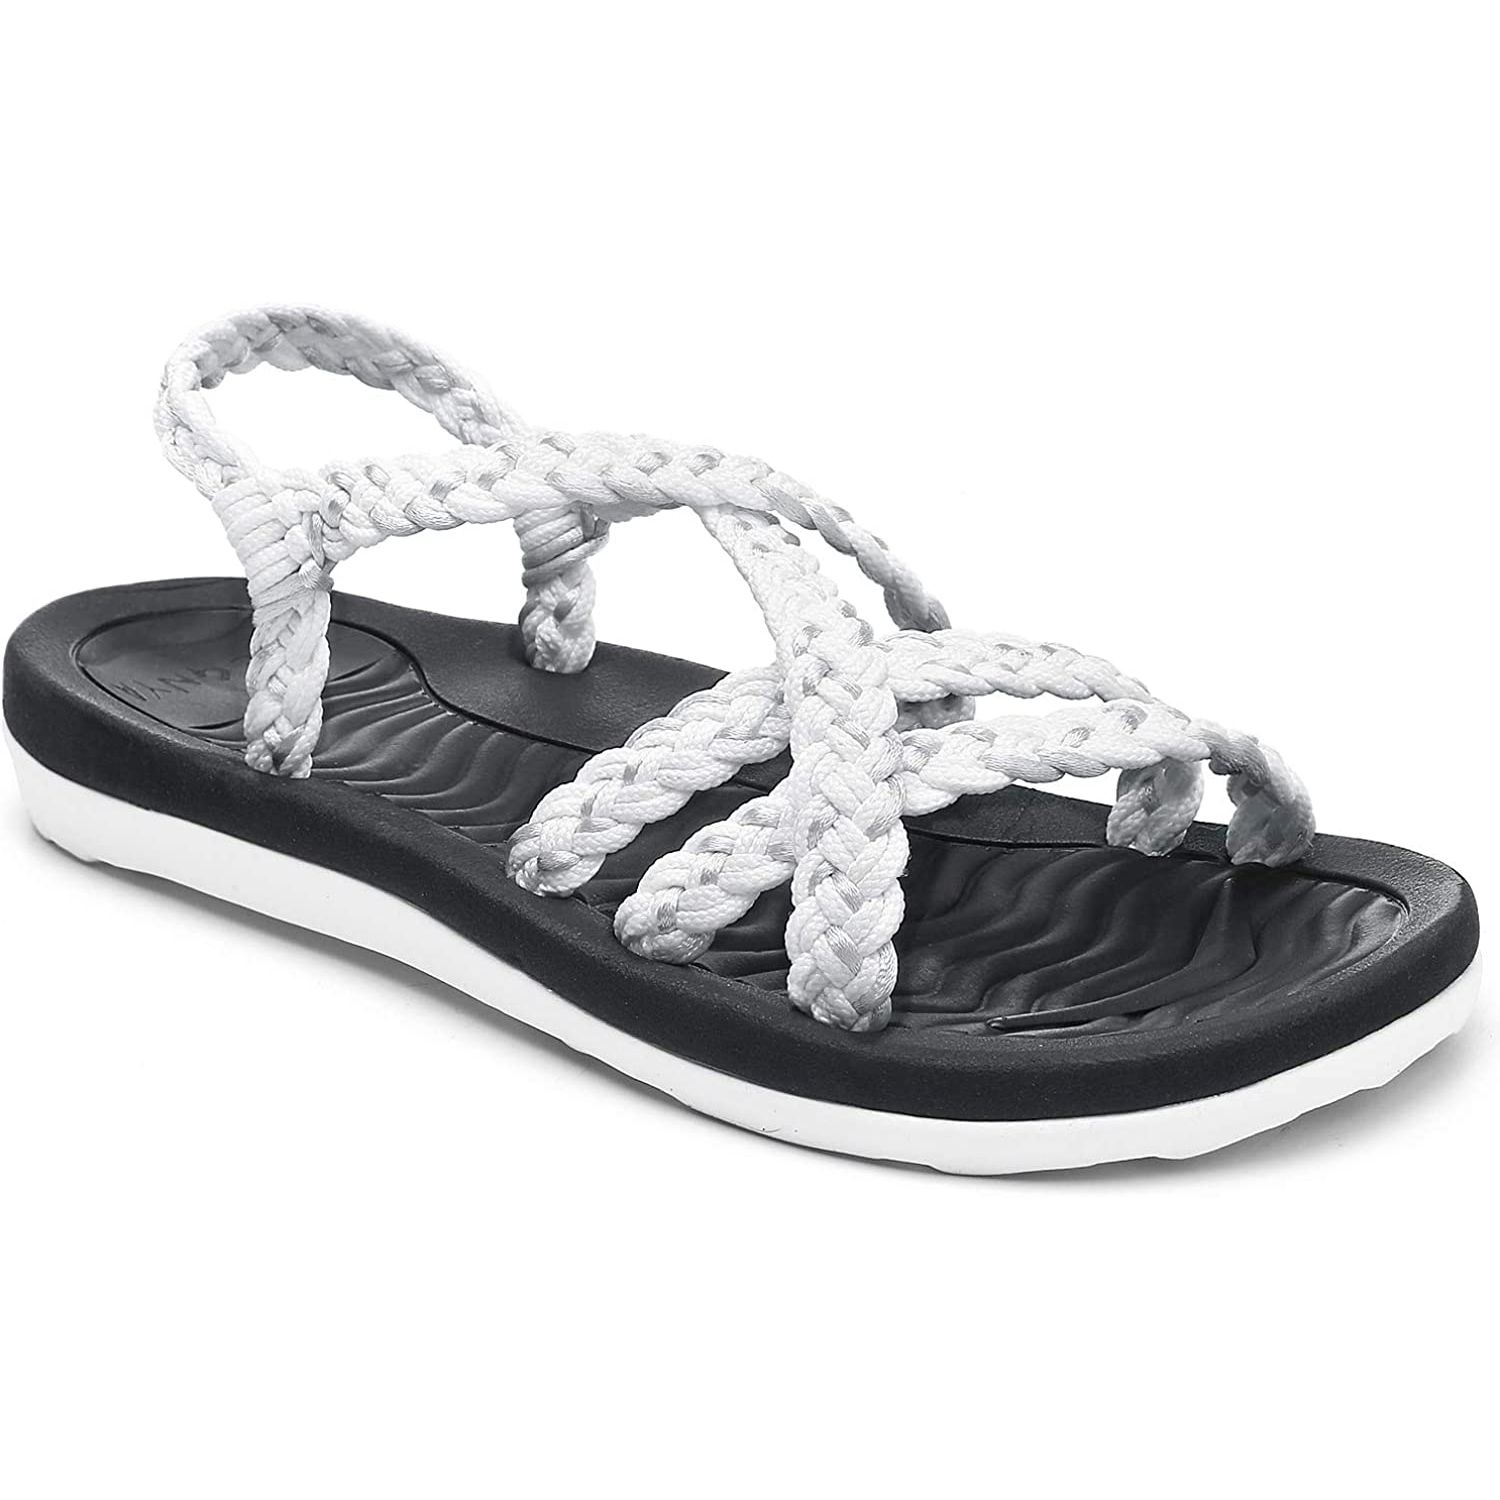 The Megnya Walking Sandals Have Comfortable Features like Arch Support ...